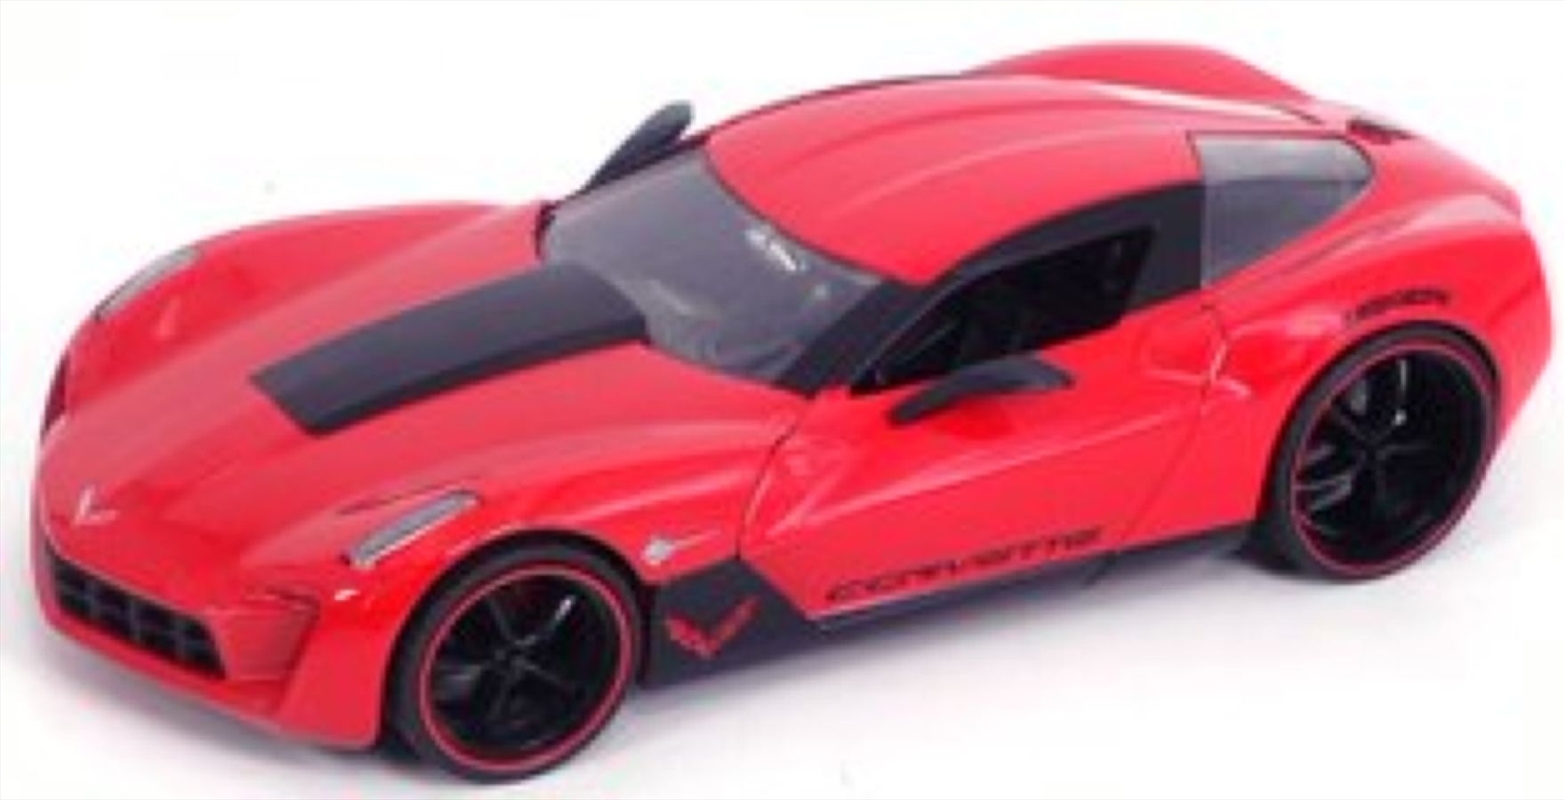 Big Time Muscle - Chevy Corvette Sray 2009 Red 1:24 Scale Diecast Vehicle/Product Detail/Figurines